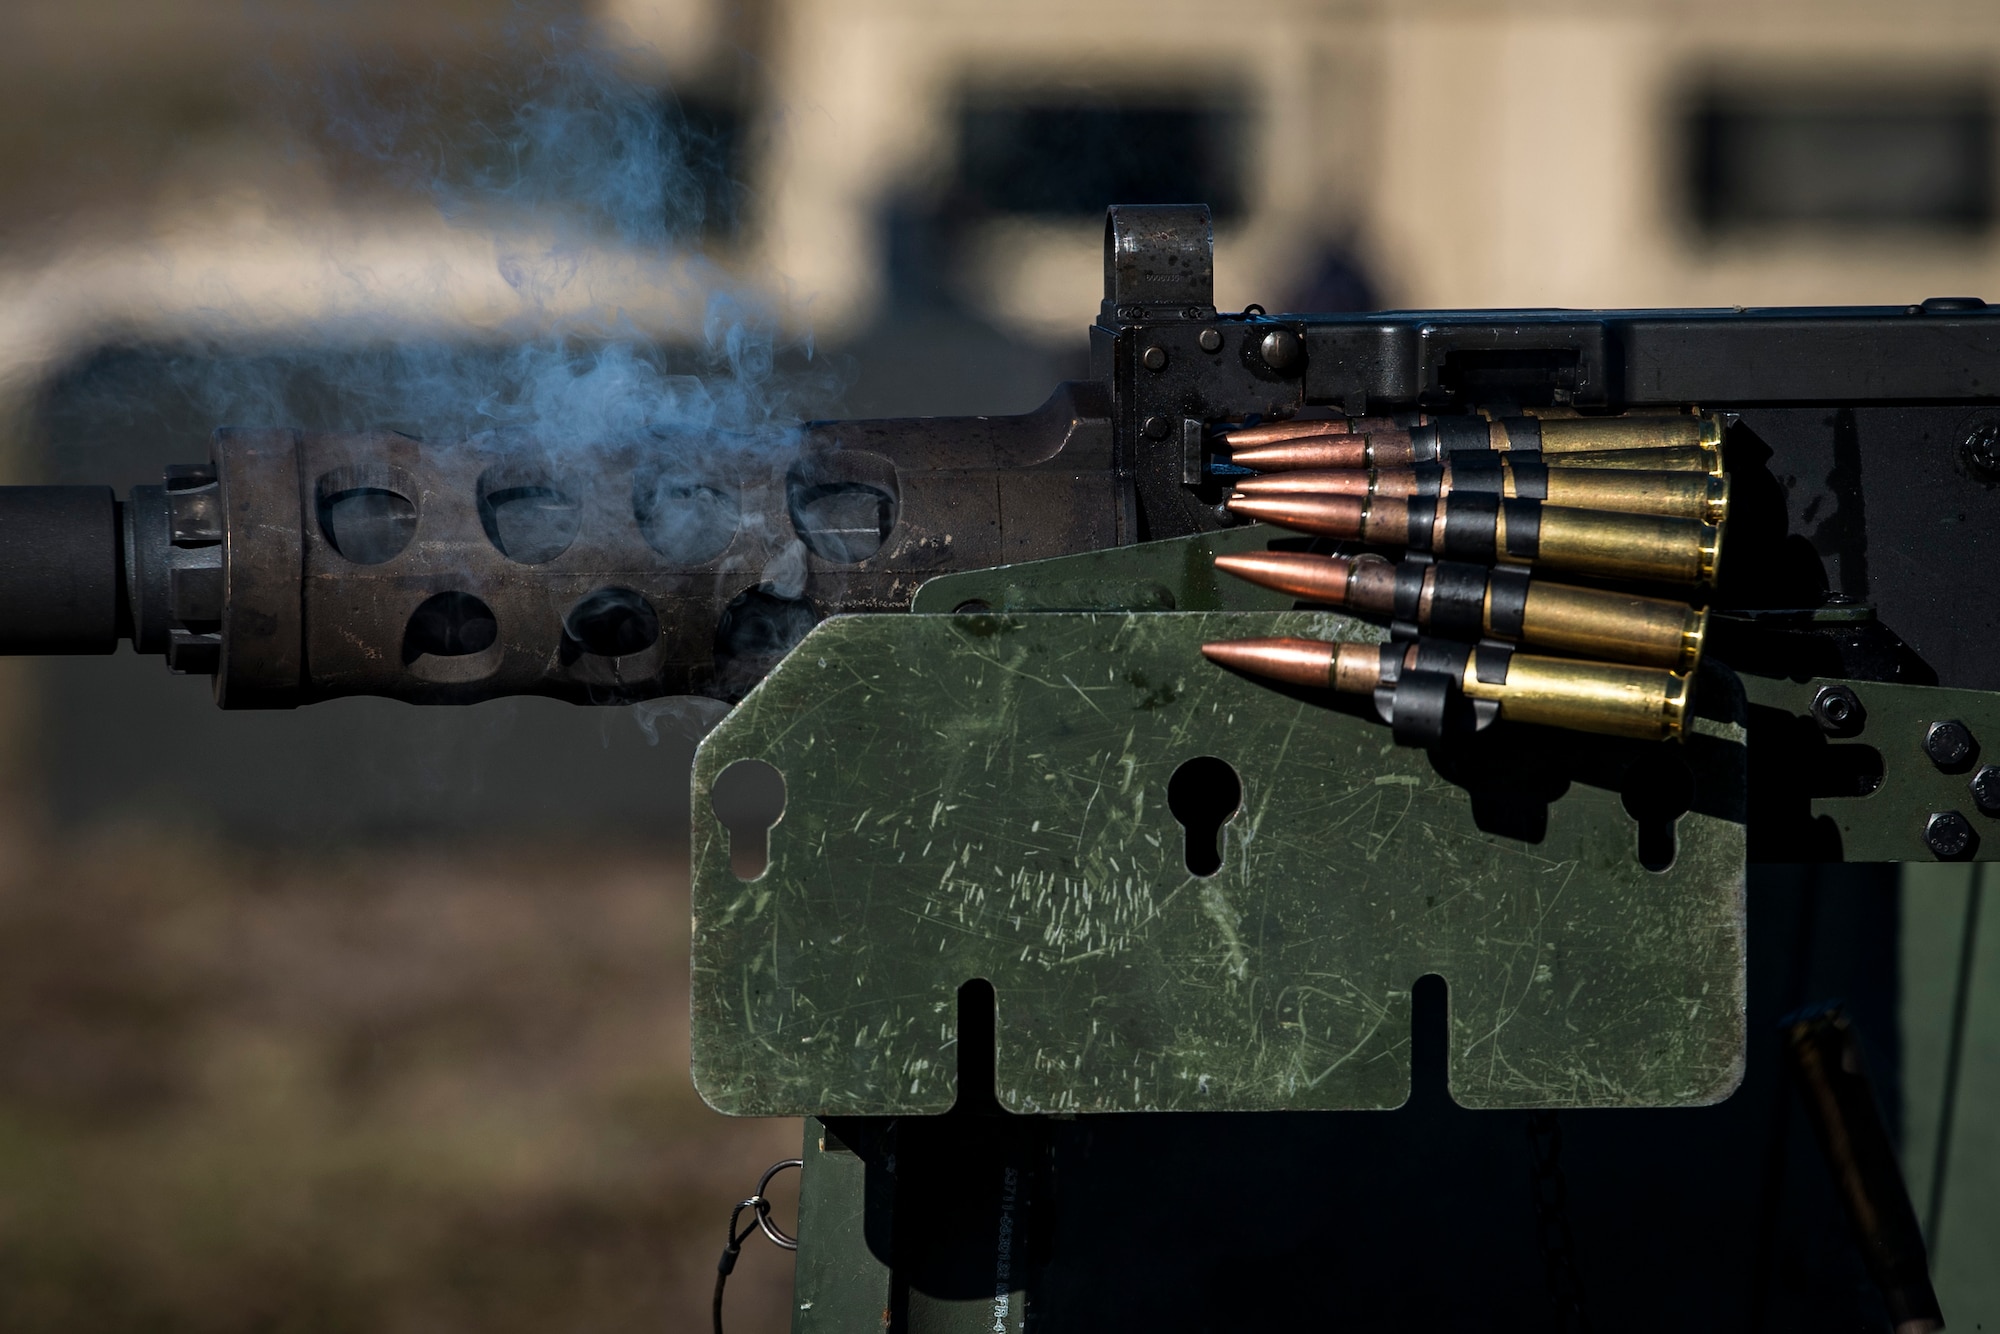 An Airman from the 823d Base Defense Squadron, fires a .50 Caliber M2 machine gun during a heavy weapons qualification, Dec. 13, 2017, at Camp Blanding Joint Training Center, Fla. Airmen shot at targets with the M2 to maintain their proficiency and familiarize themselves with the weapon. (U.S. Air Force photo by Senior Airman Janiqua P. Robinson)